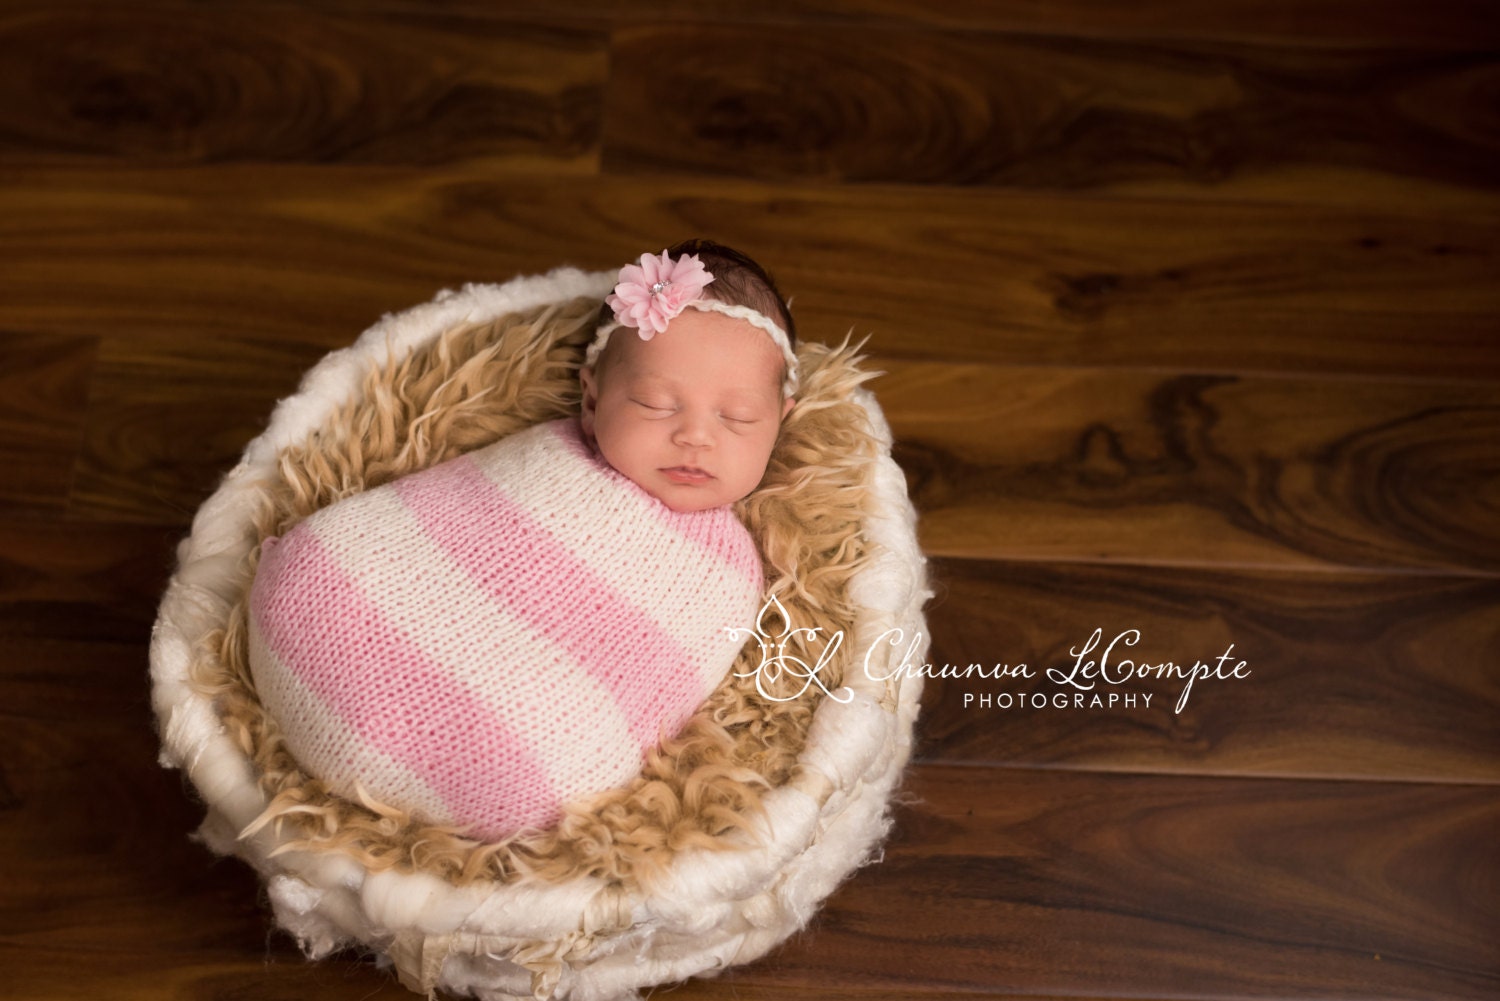 Pink and Ivory Knit Swaddle Sack and Tie Back /  Newborn Swaddle Sack / Newborn Photo Prop / Knit Newborn Prop / Baby Cocoon / Newborn Sack